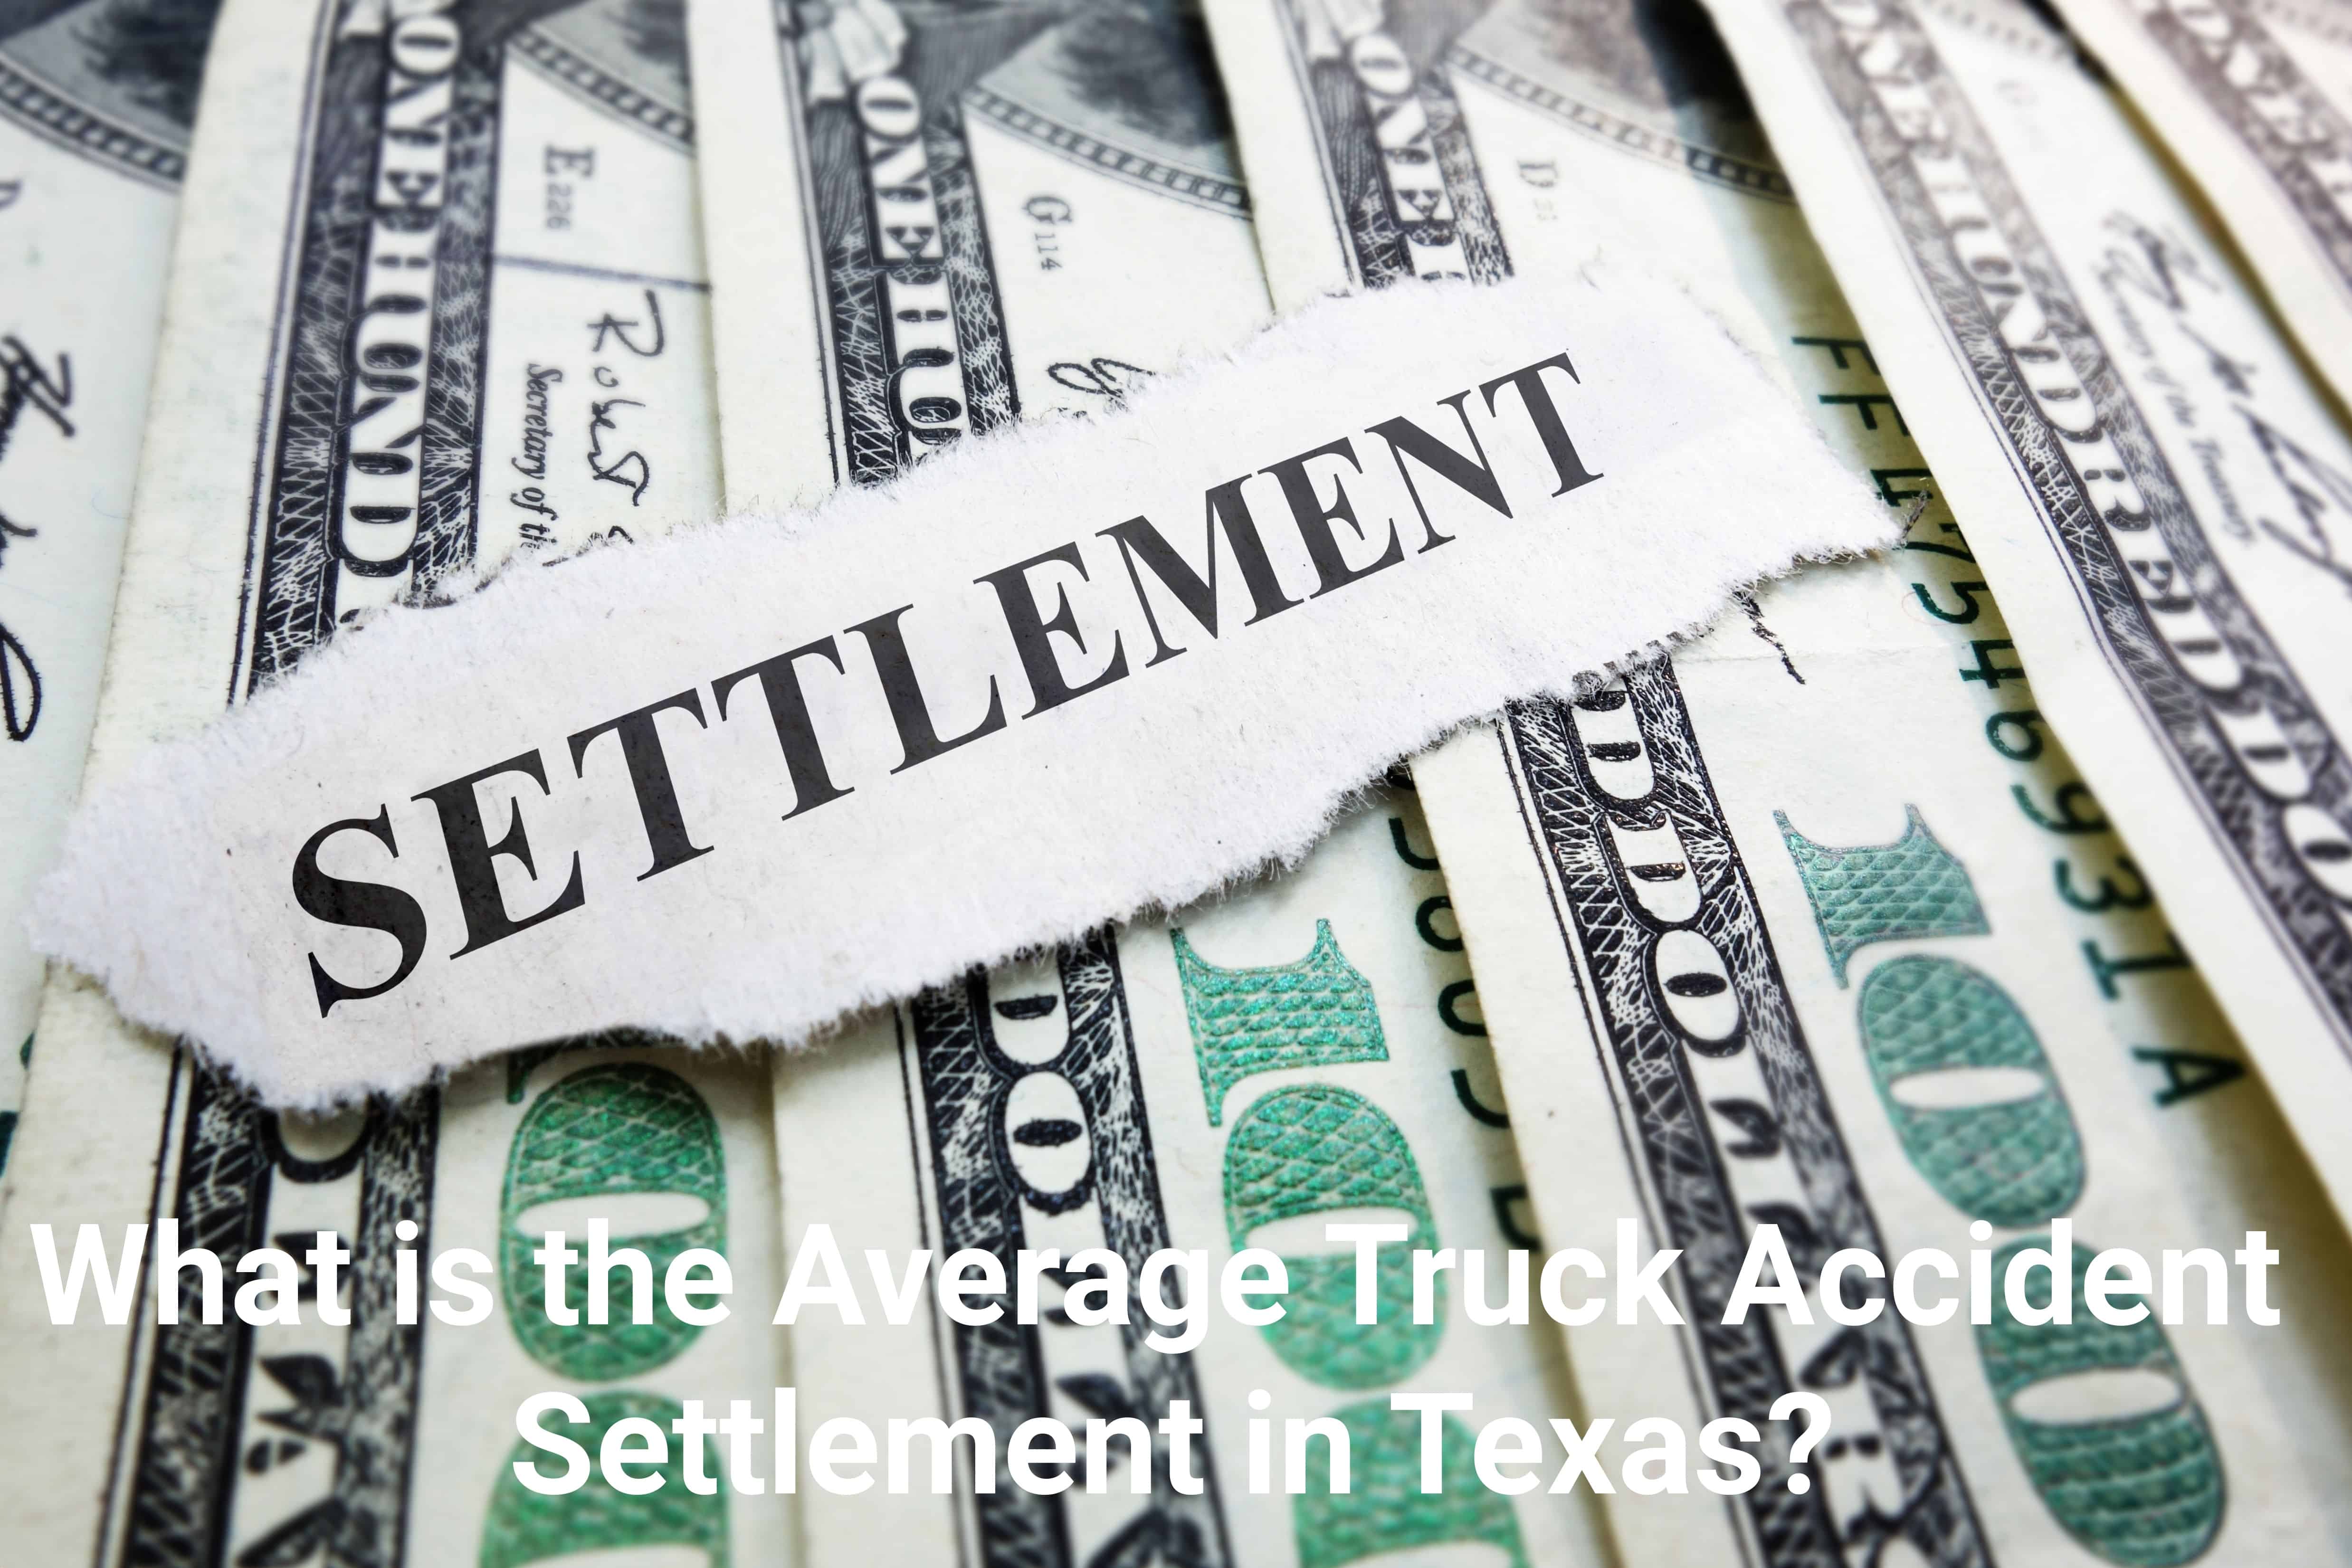 What is the average truck accident settlement in Texas?